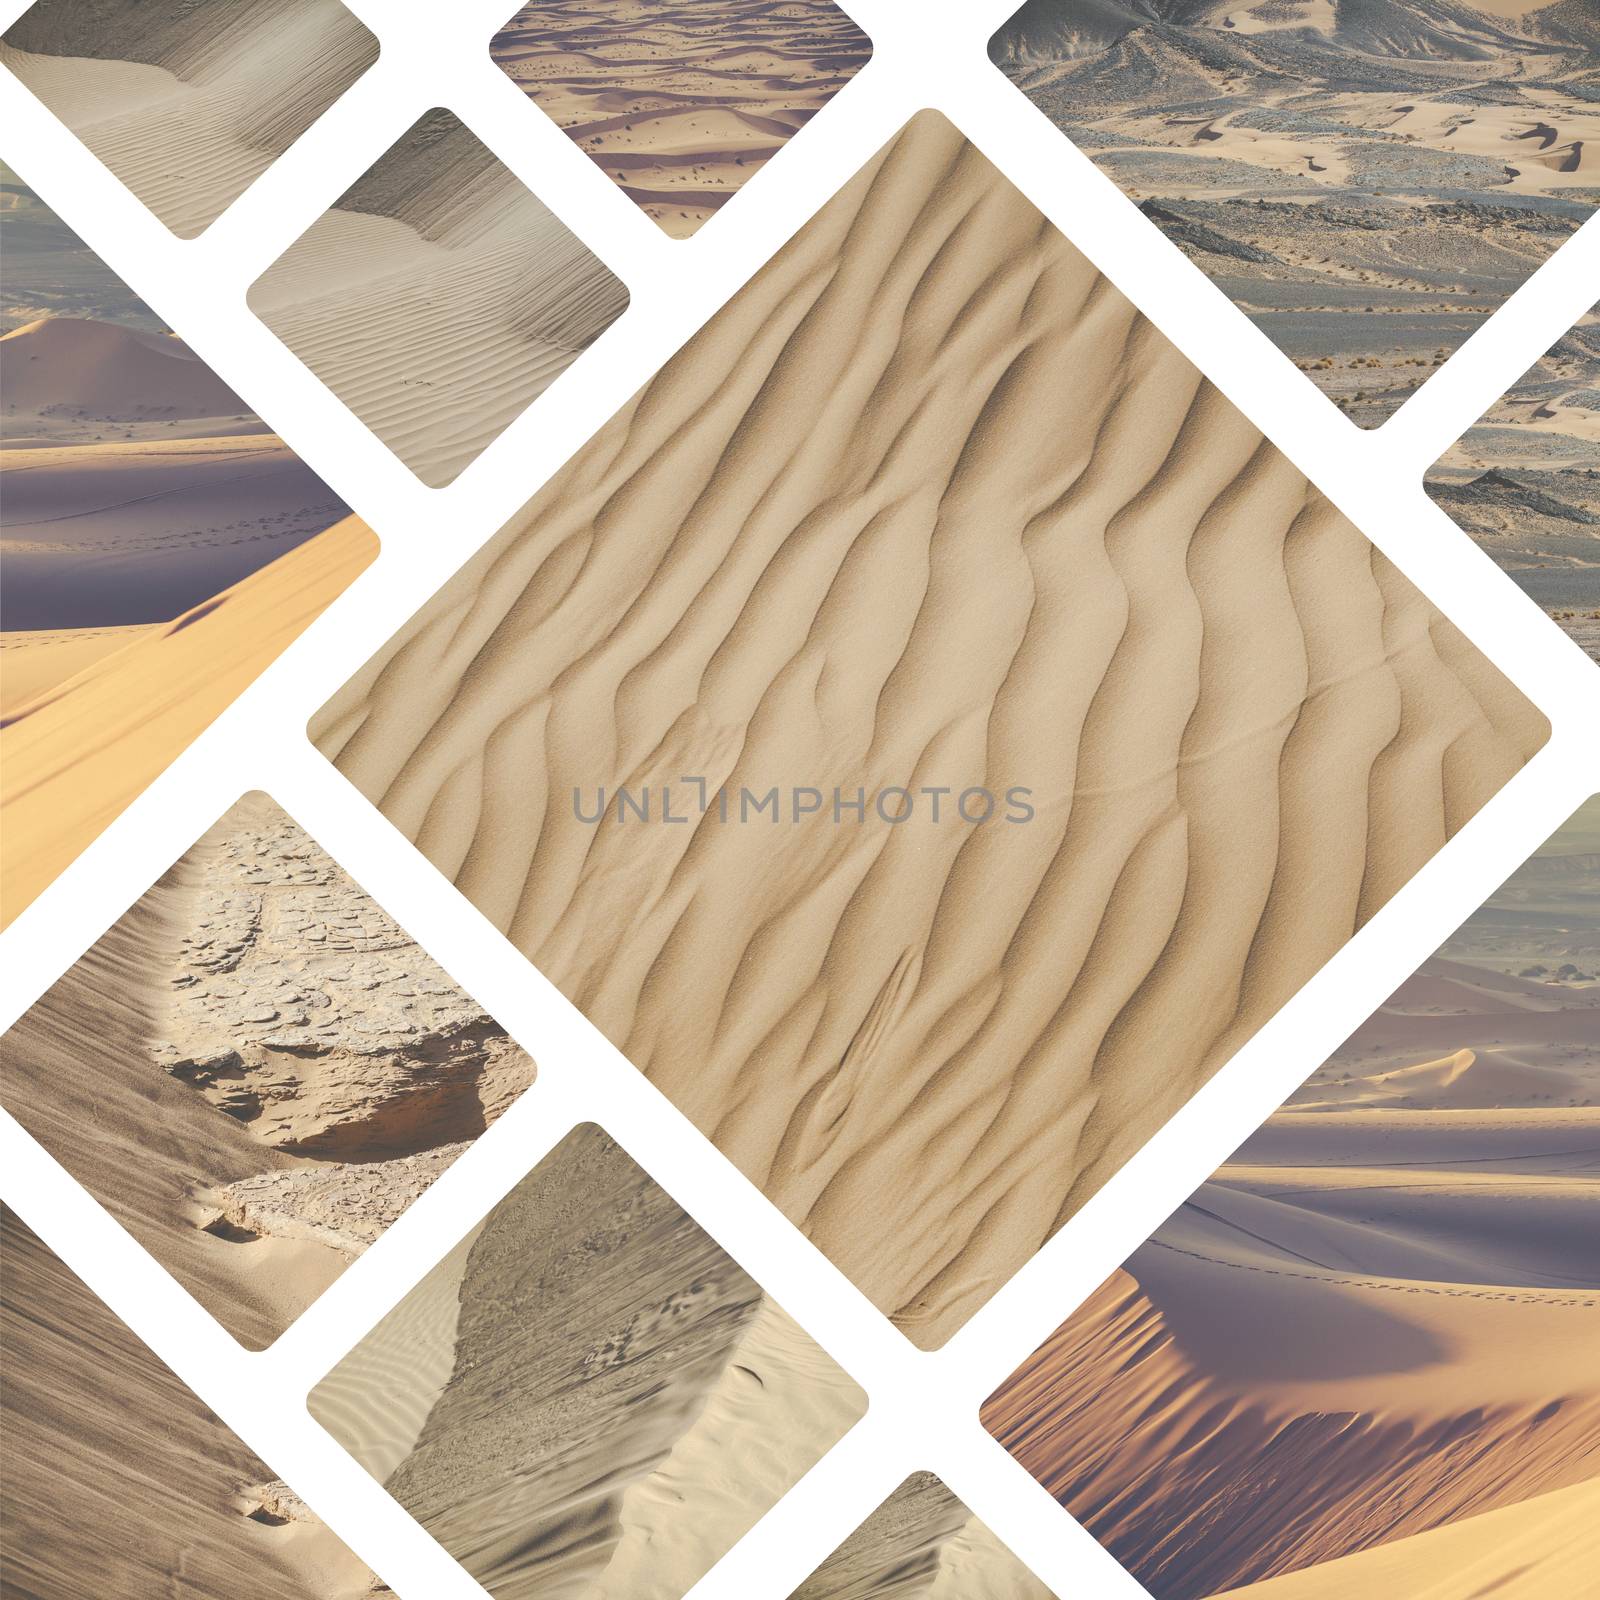 Collage of sahara deser in Morocco - my photos by mariusz_prusaczyk